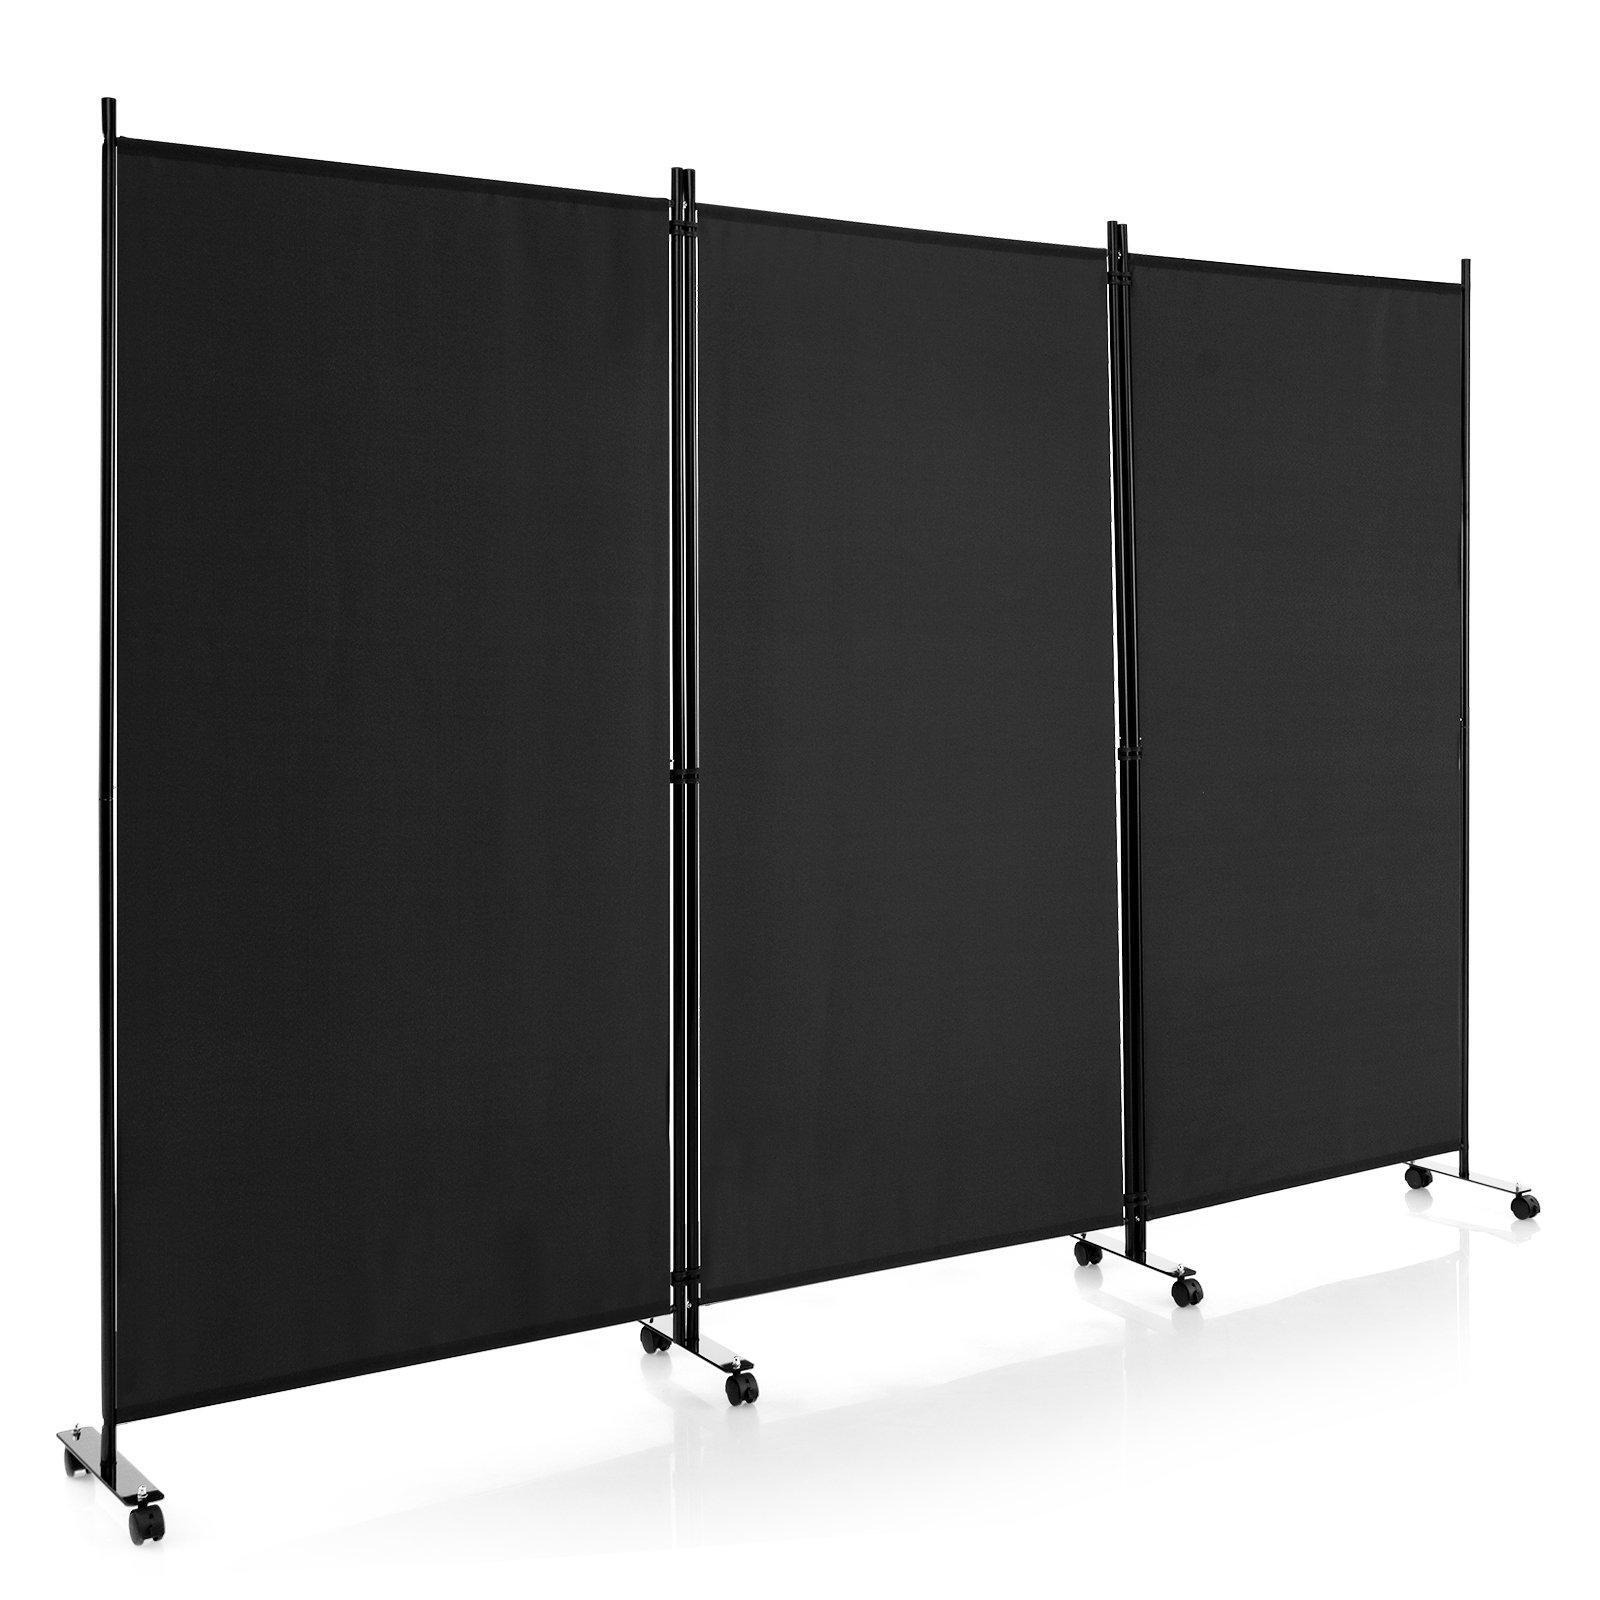 3 Panel Room Divider on Wheels Rolling Privacy Screens Portable Freestanding - image 1